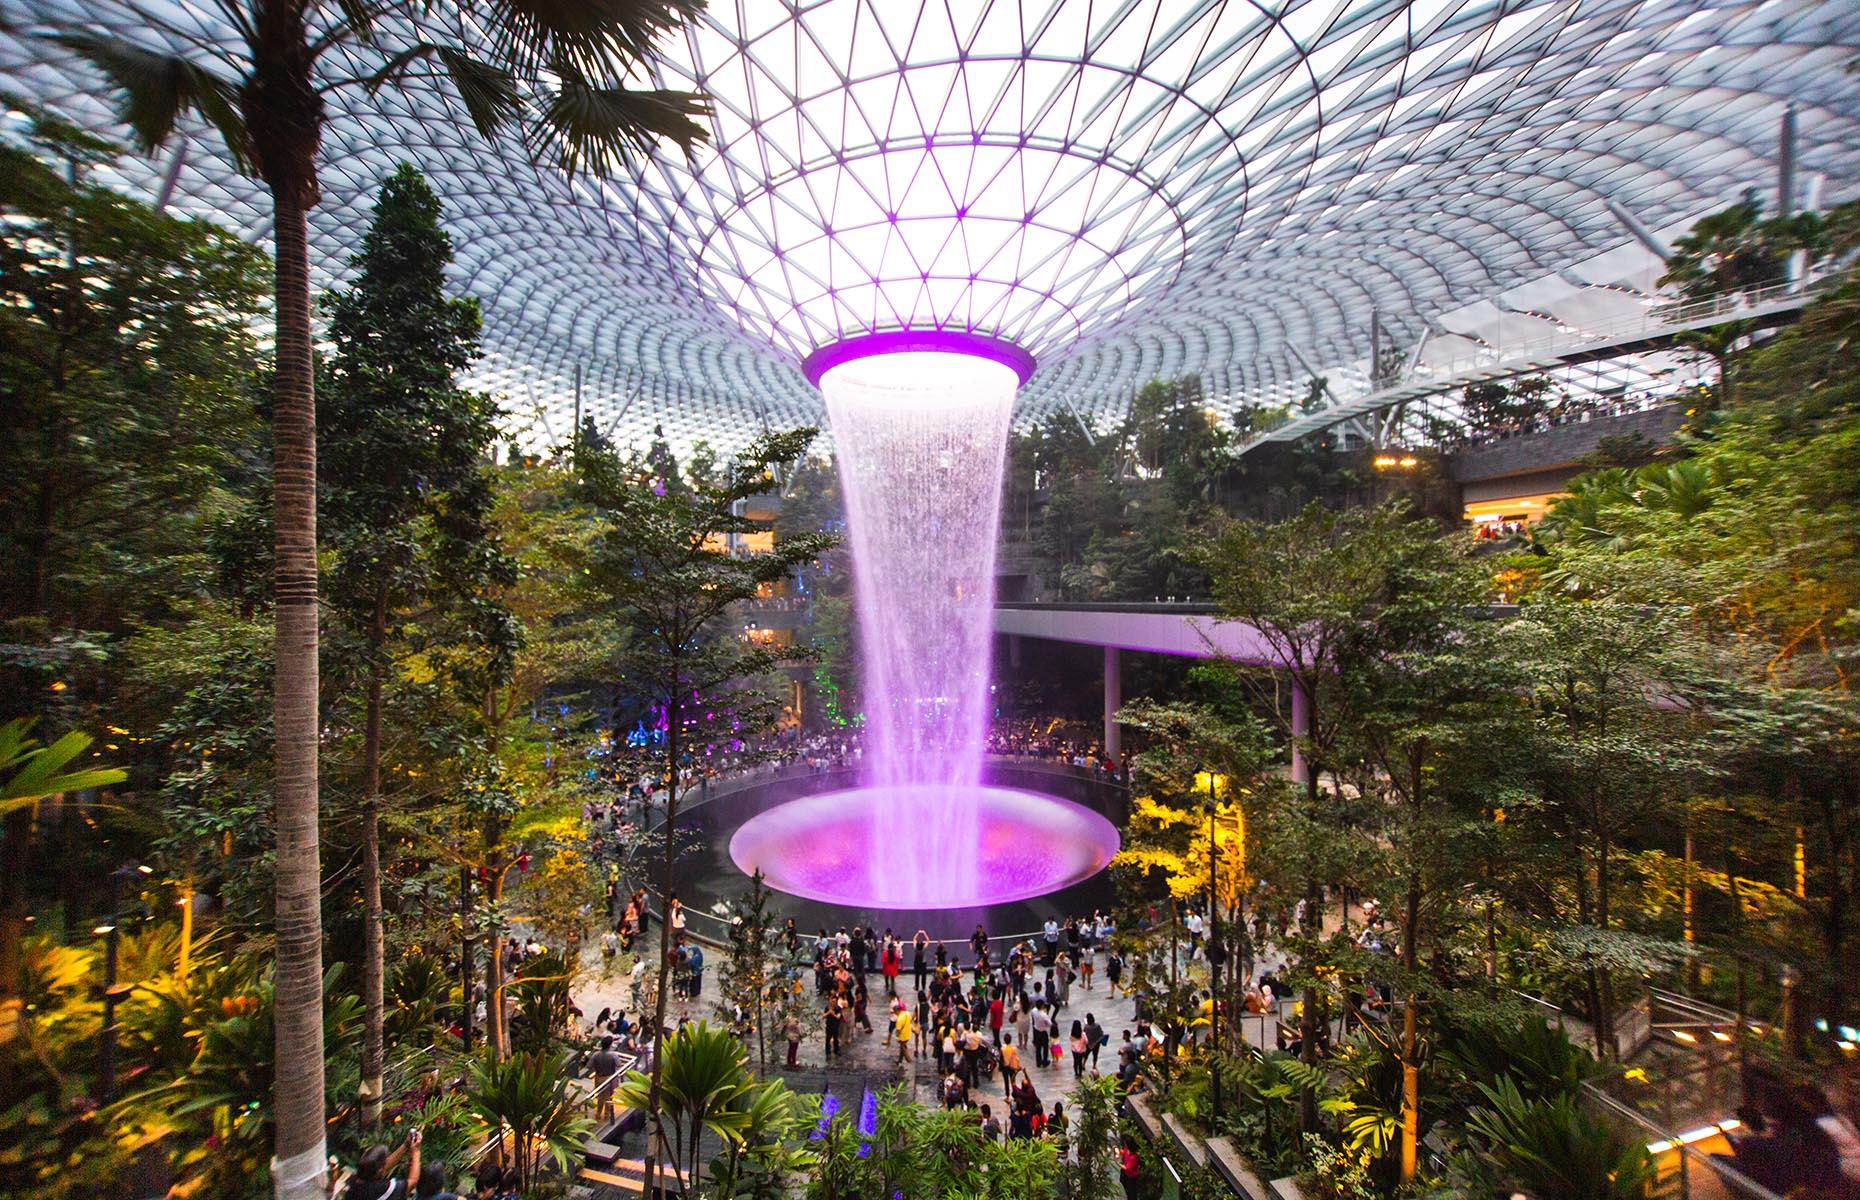 <p>It’s unusual to want to spend a whole lot of time at the airport on holiday, but the Jewel at Changi is a day out with a difference. Connected to the arrivals hall in Terminal 1 since 2019, this incredible nature-themed retail, dining and entertainment complex has to be seen to be believed. The first thing that will blow you away is the magnificent Rain Vortex, which stands at a whopping 131 feet and is the world’s tallest indoor waterfall. If you can tear yourself and your camera away from its unique lightshow, go wild in the hundreds of stores, while youngsters are equally catered for on the top floor, where two mazes, bouncing nets and giant slides await. It beats trailing around duty free, but don’t get distracted and miss your flight!</p>